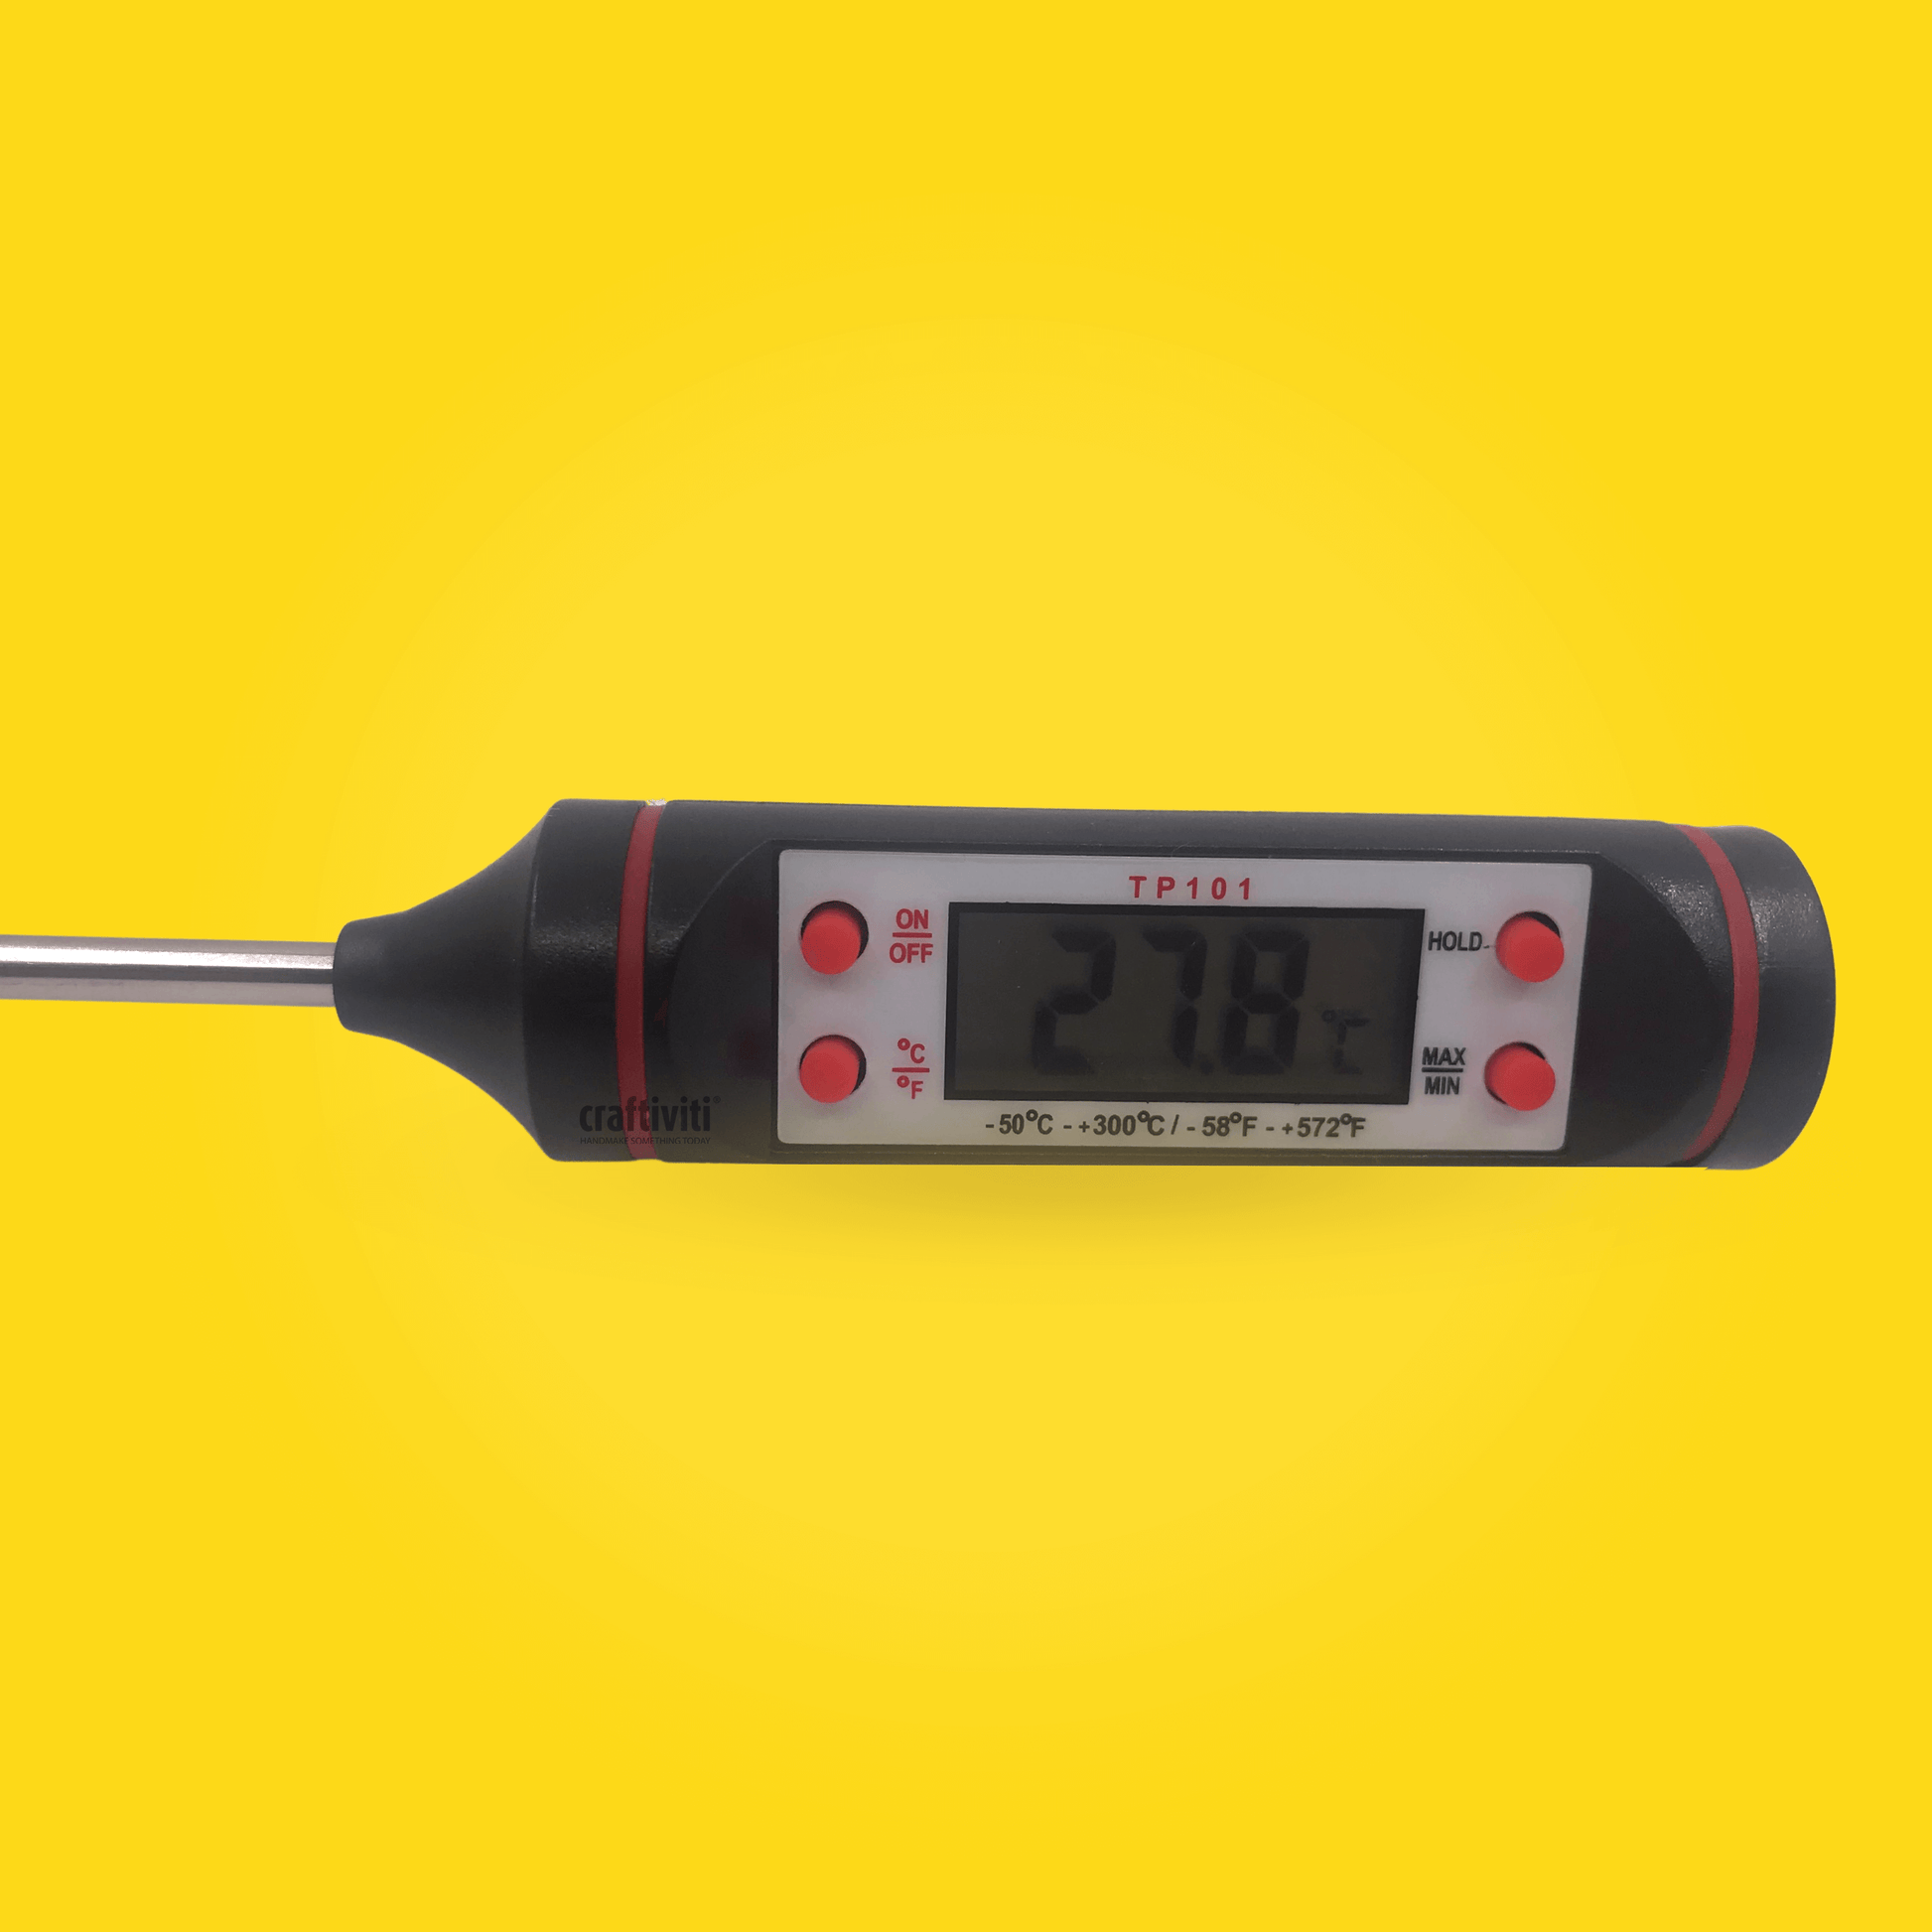 Digital Thermometer TP101